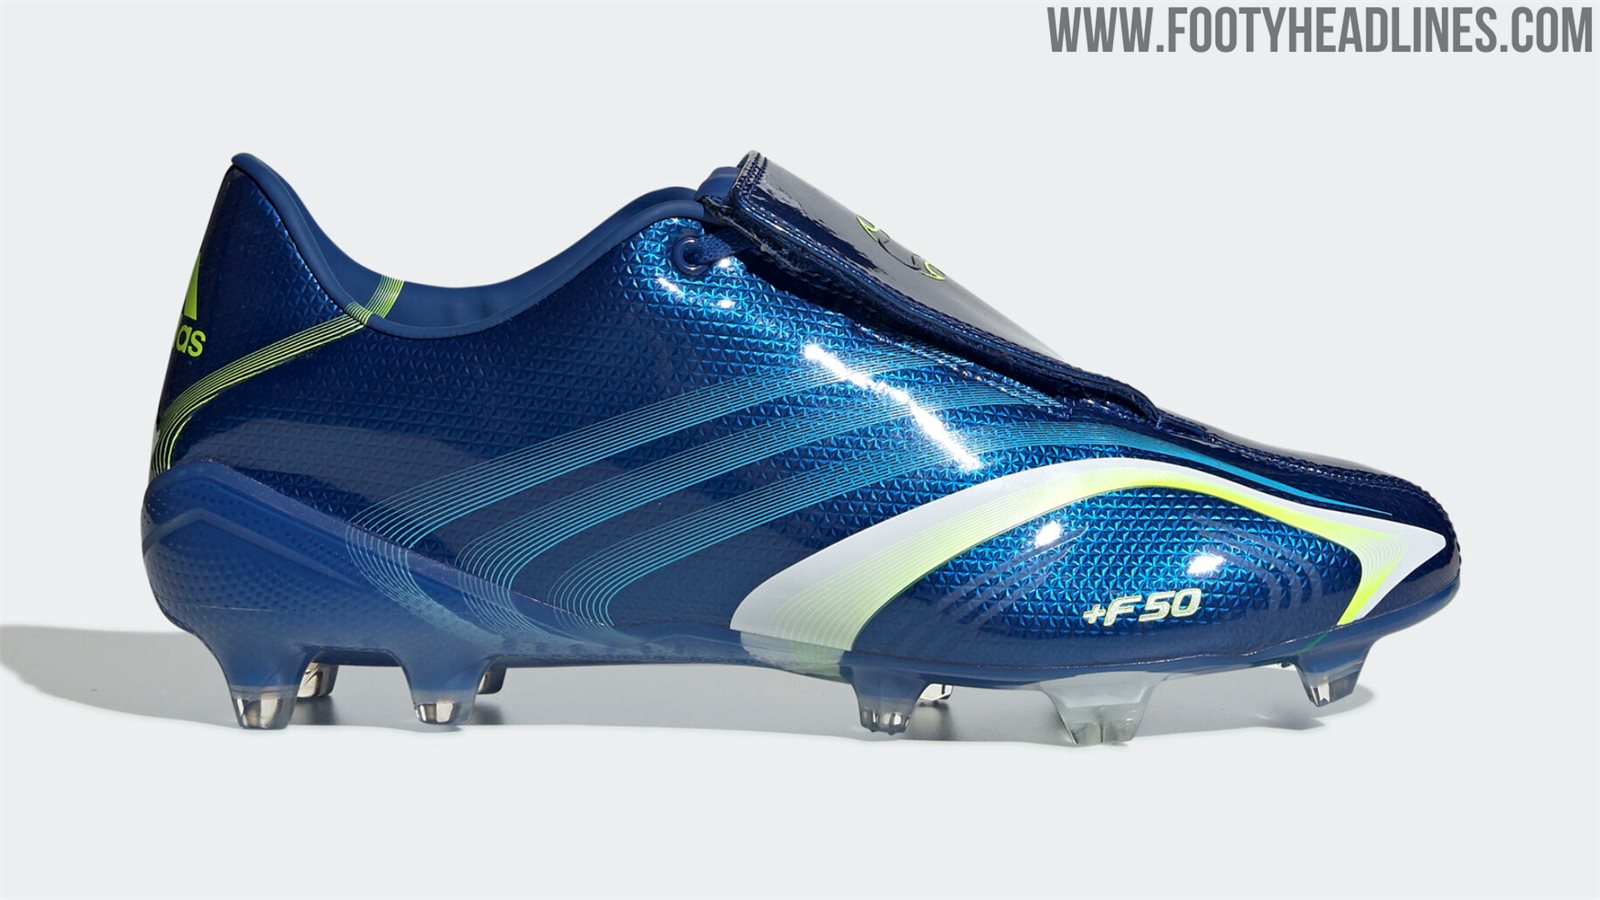 Adidas X 506+ Tunit Boots Released - Footy